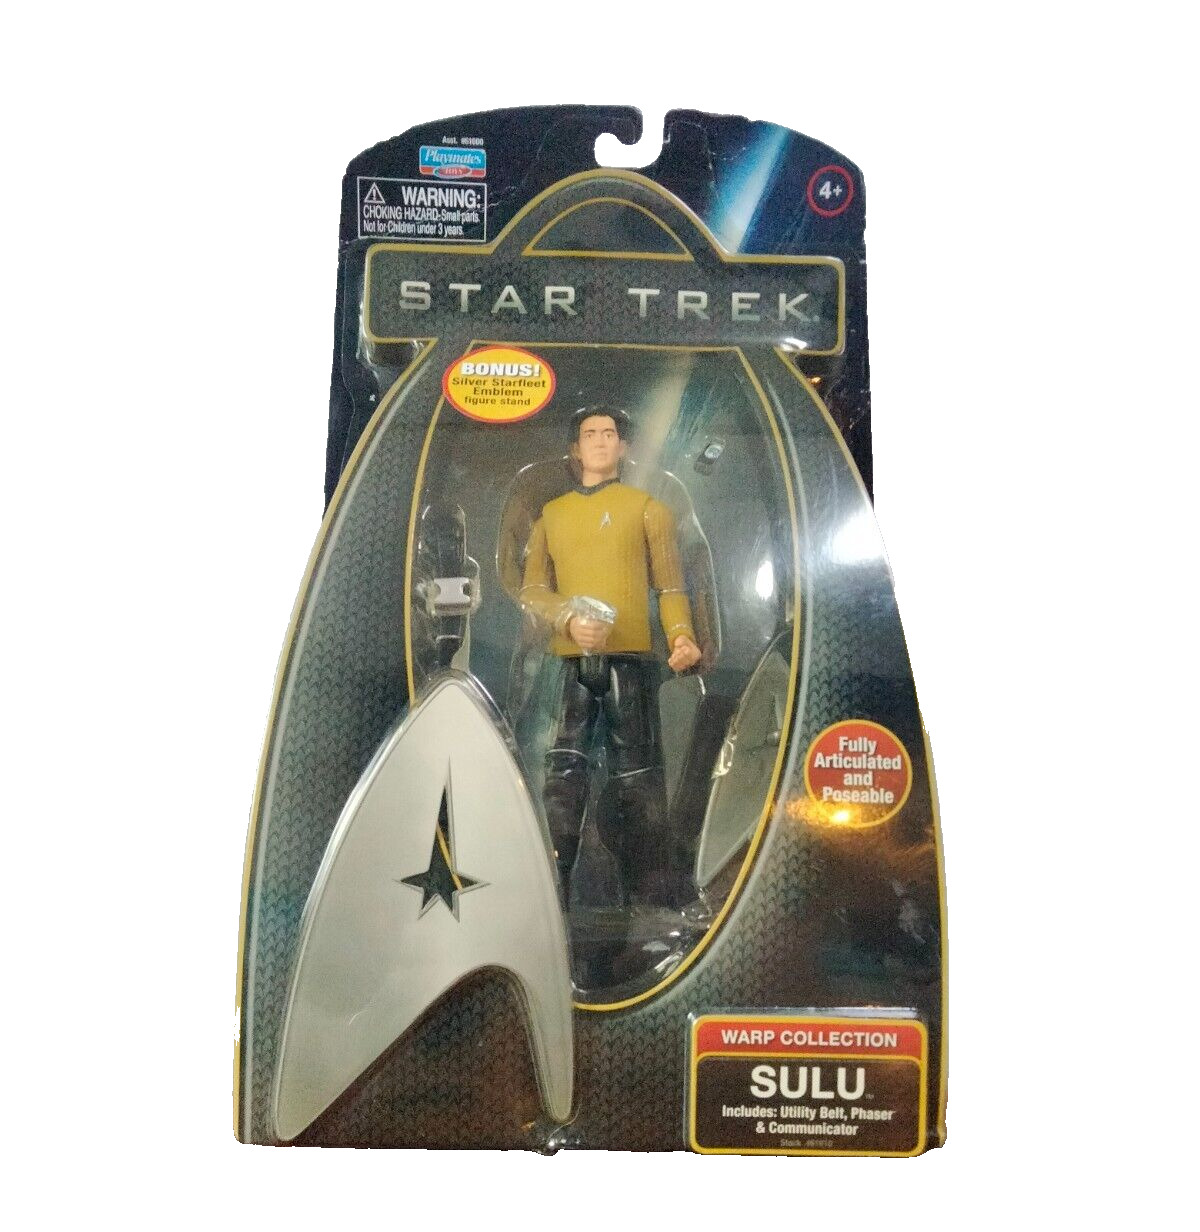 Star Trek Command Collection Sulu Action Figure 2009 Playmates NEW